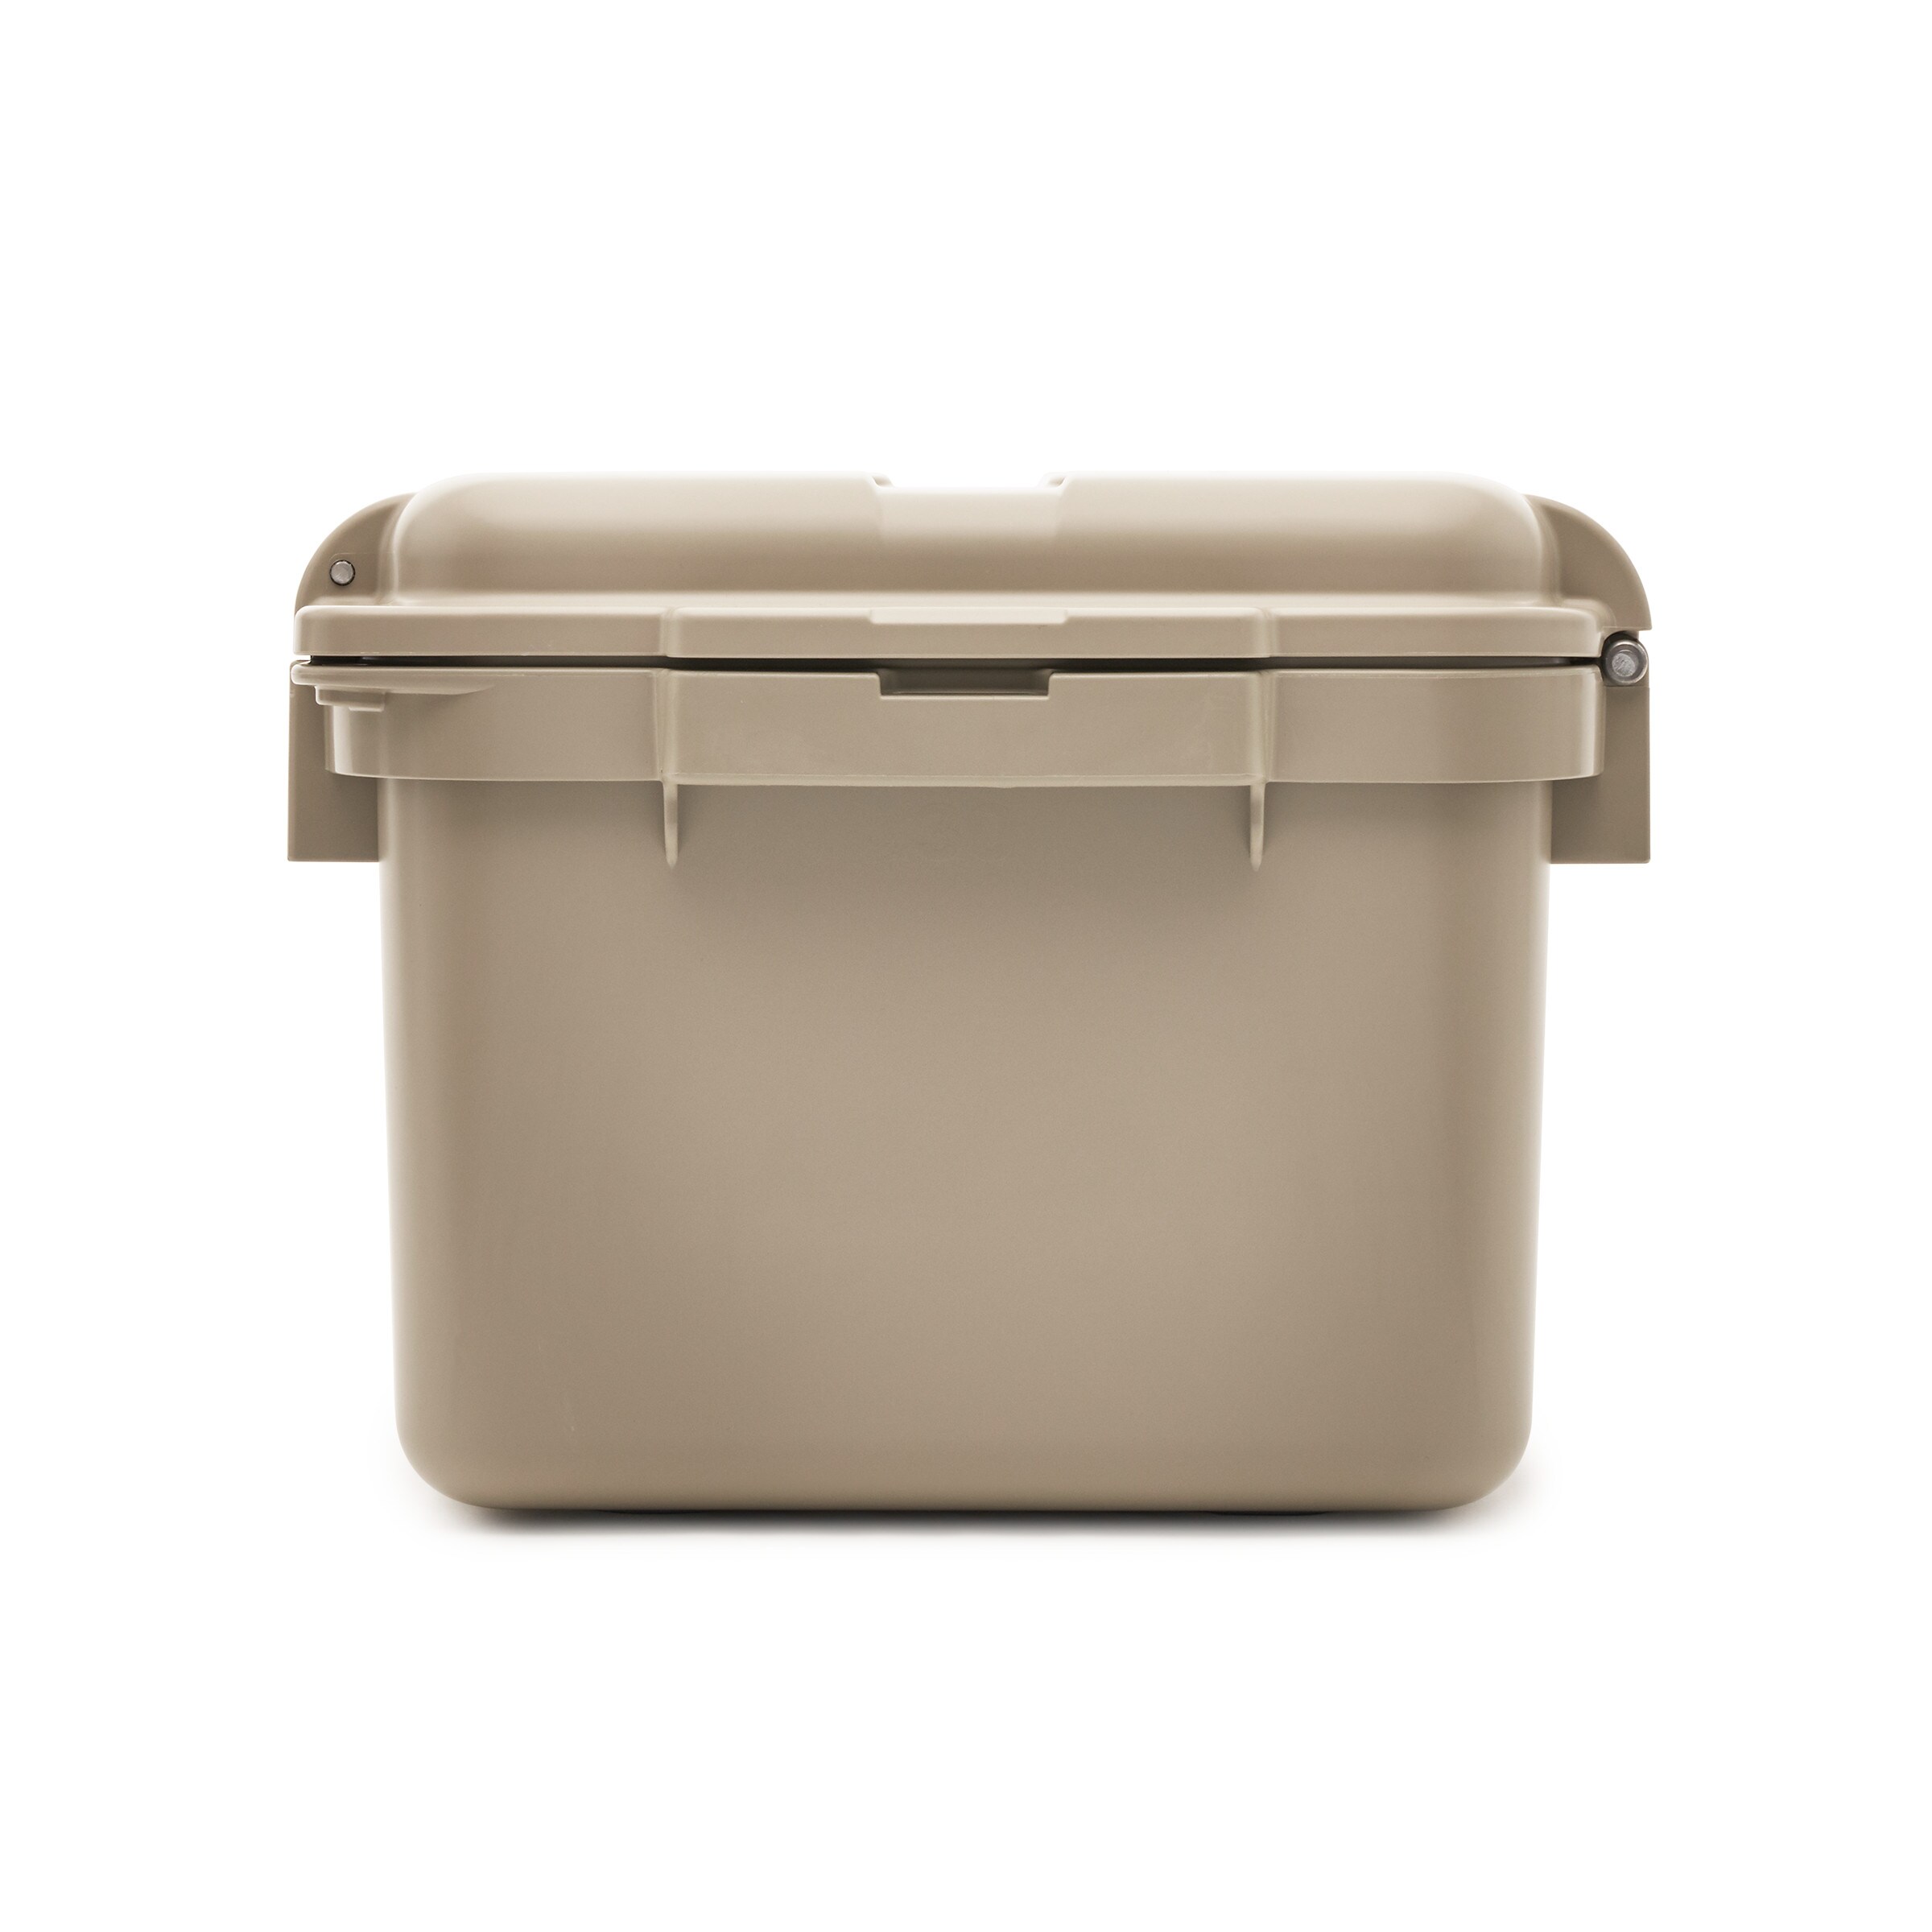 Nat's Outdoor Sports - NEW @yeti product! The Loadout Gobox. The